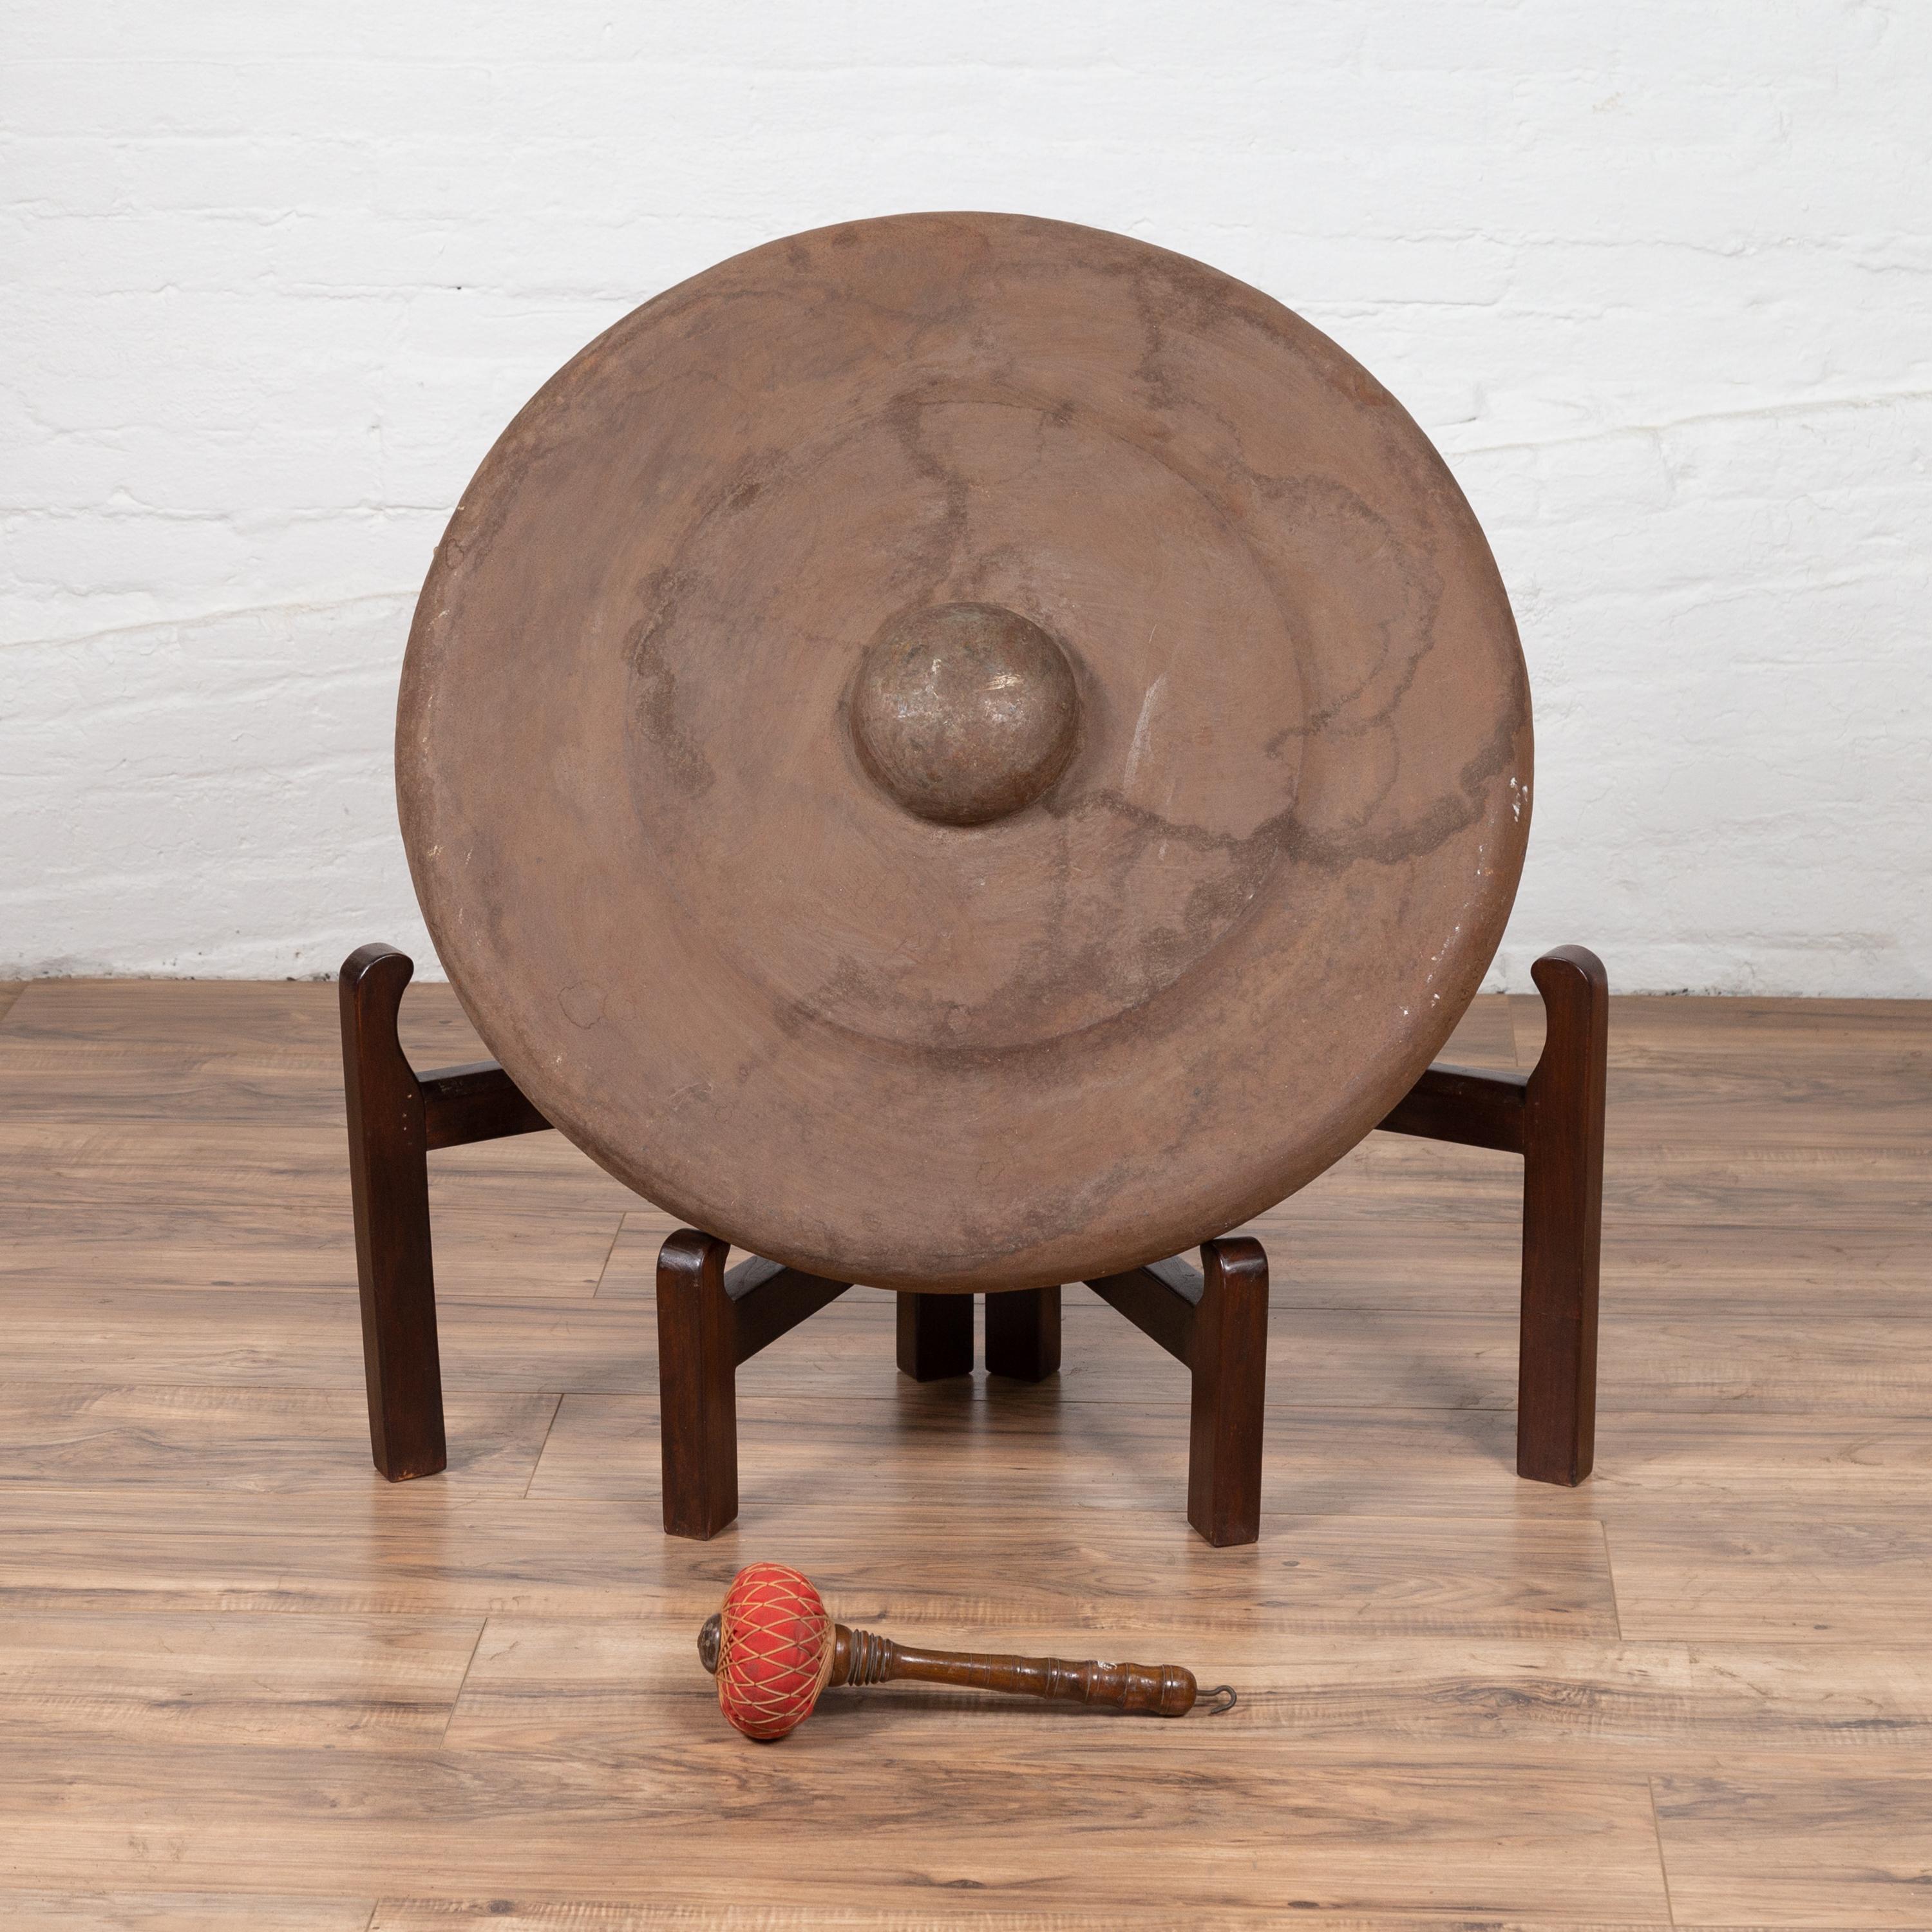 An antique Burmese bronze temple gong with mallet from the early 20th century. Please note that the base is not included. Born in Burma during the early years of the 20th century, this exquisite bronze temple gong features a traditional circular